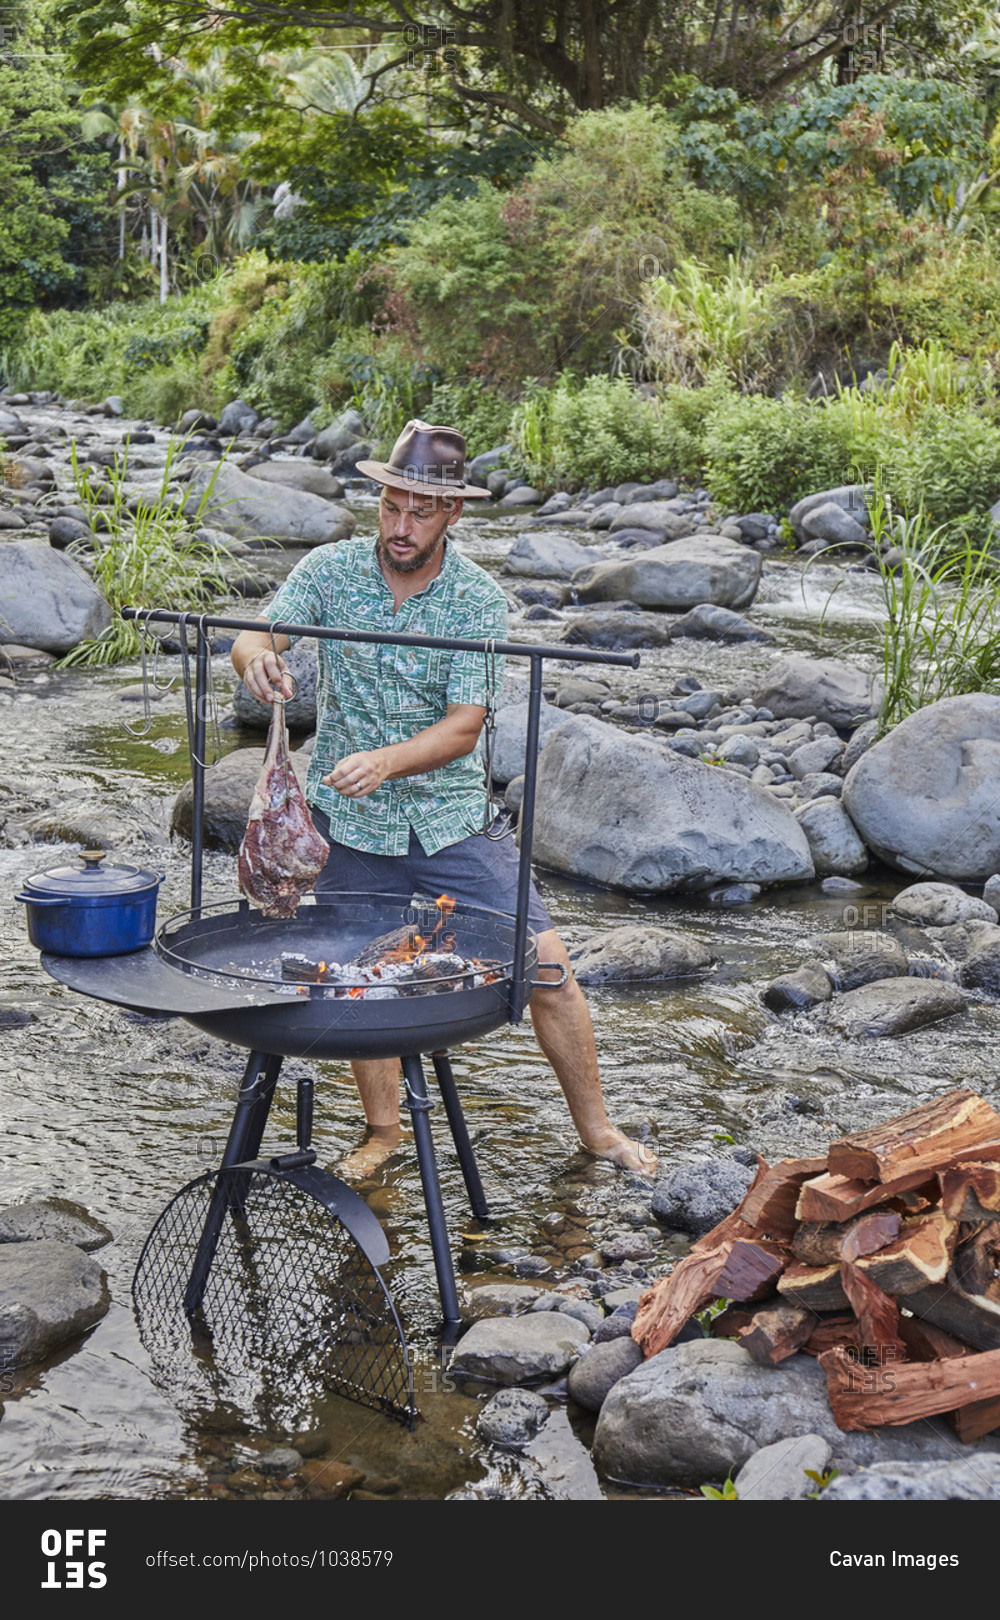 Chef Cooking over Open Fire at Campsite near Streambed